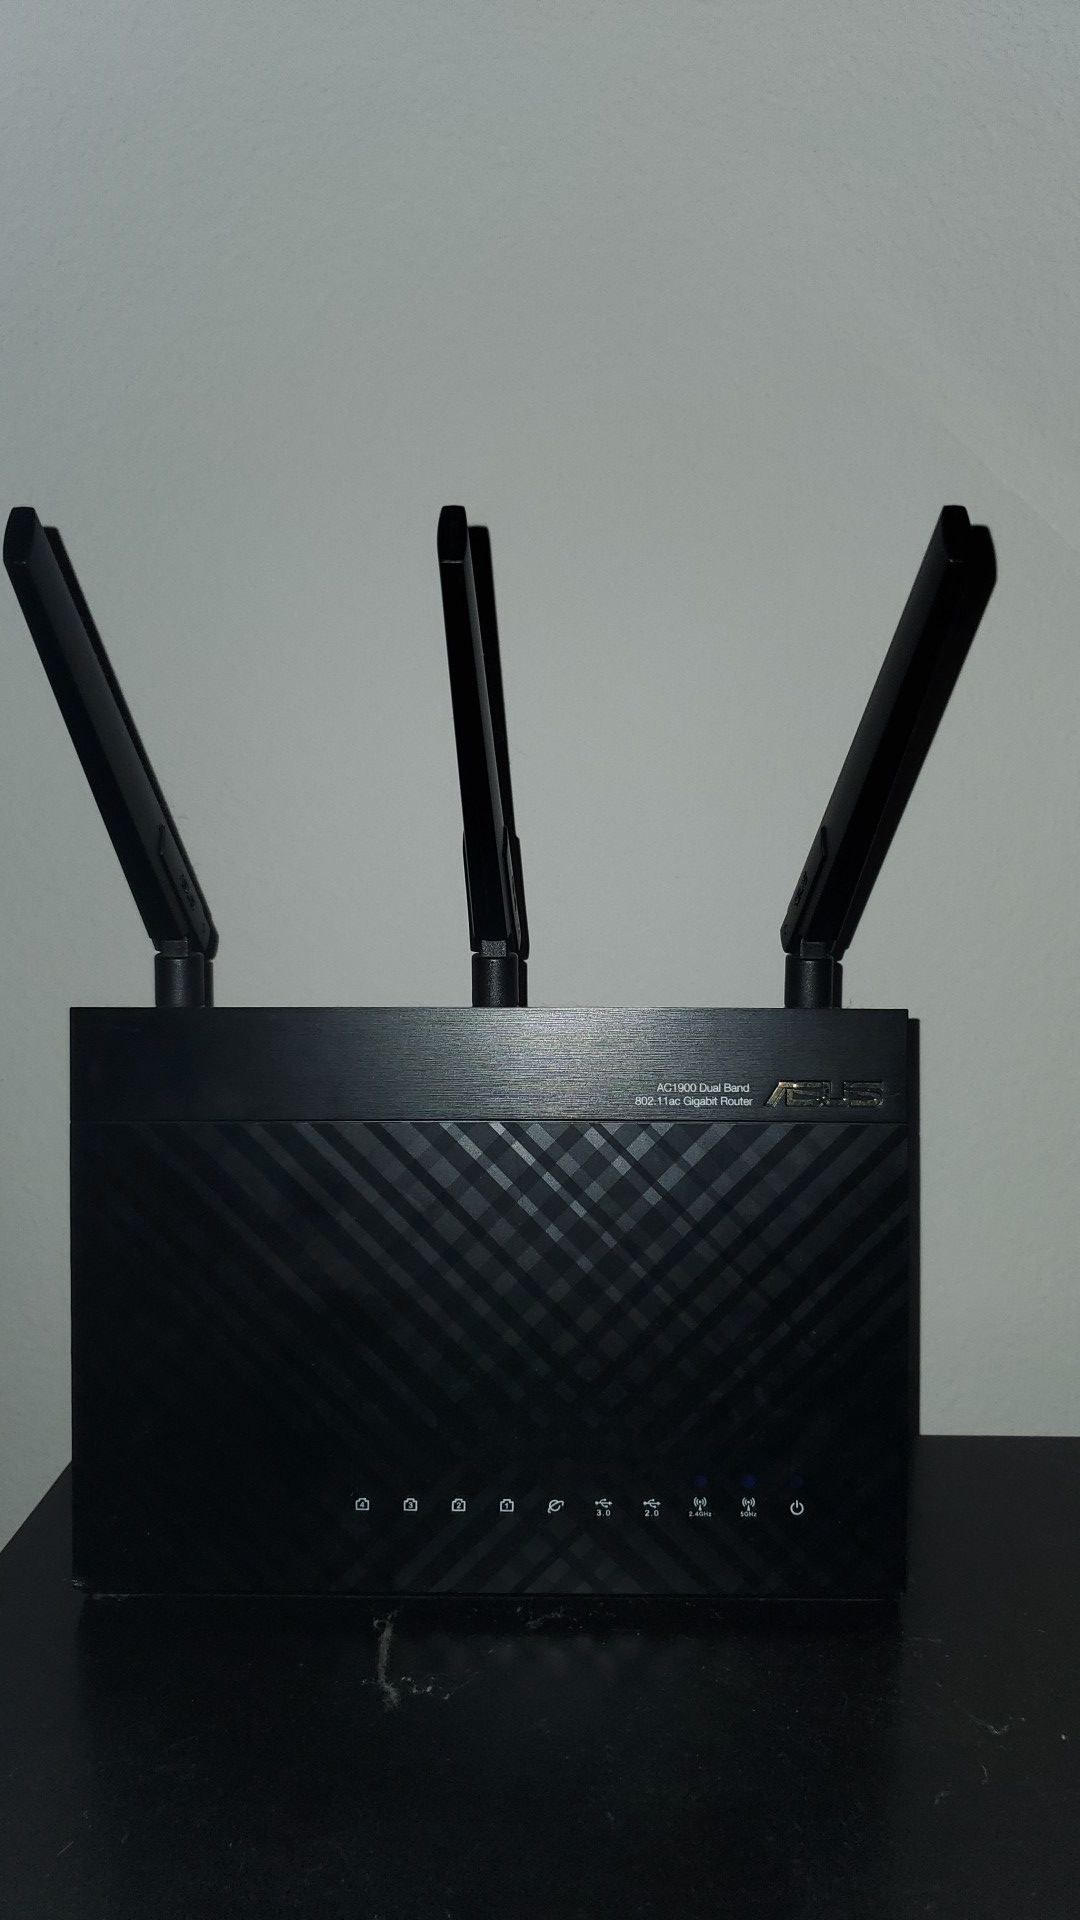 Asus RT-AC68P AC-1900 Dual Band Router